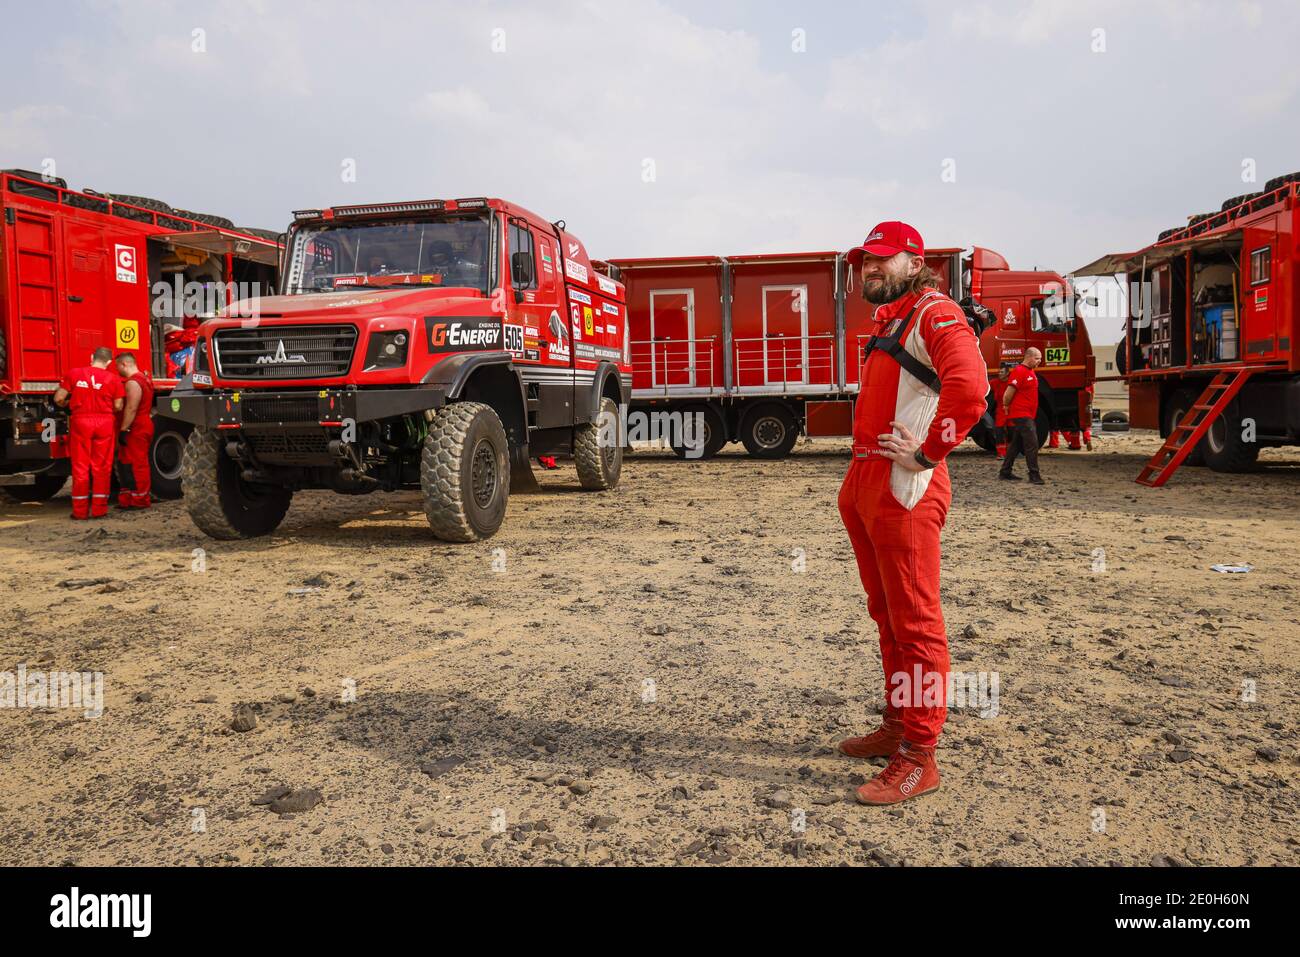 Maz, Maz-Sportauto, Camion, Truck, ambiance during the shakedown of the Dakar 2021 in Jeddah, Saudi Arabia on December 31, 202 / LM Stock Photo